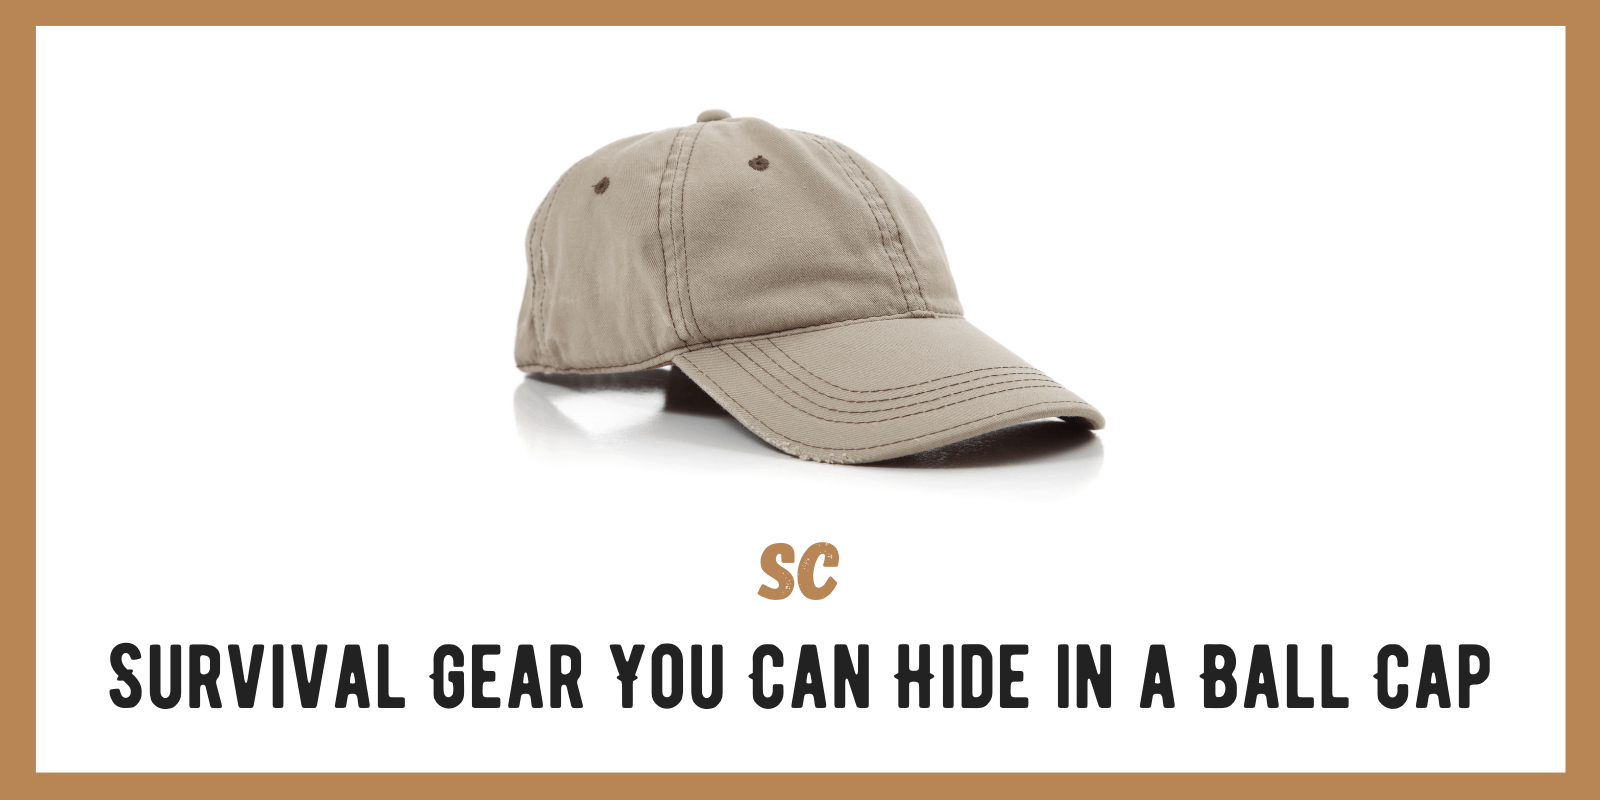 What Survival Gear Can You Secretely Hide in a Ball Cap?